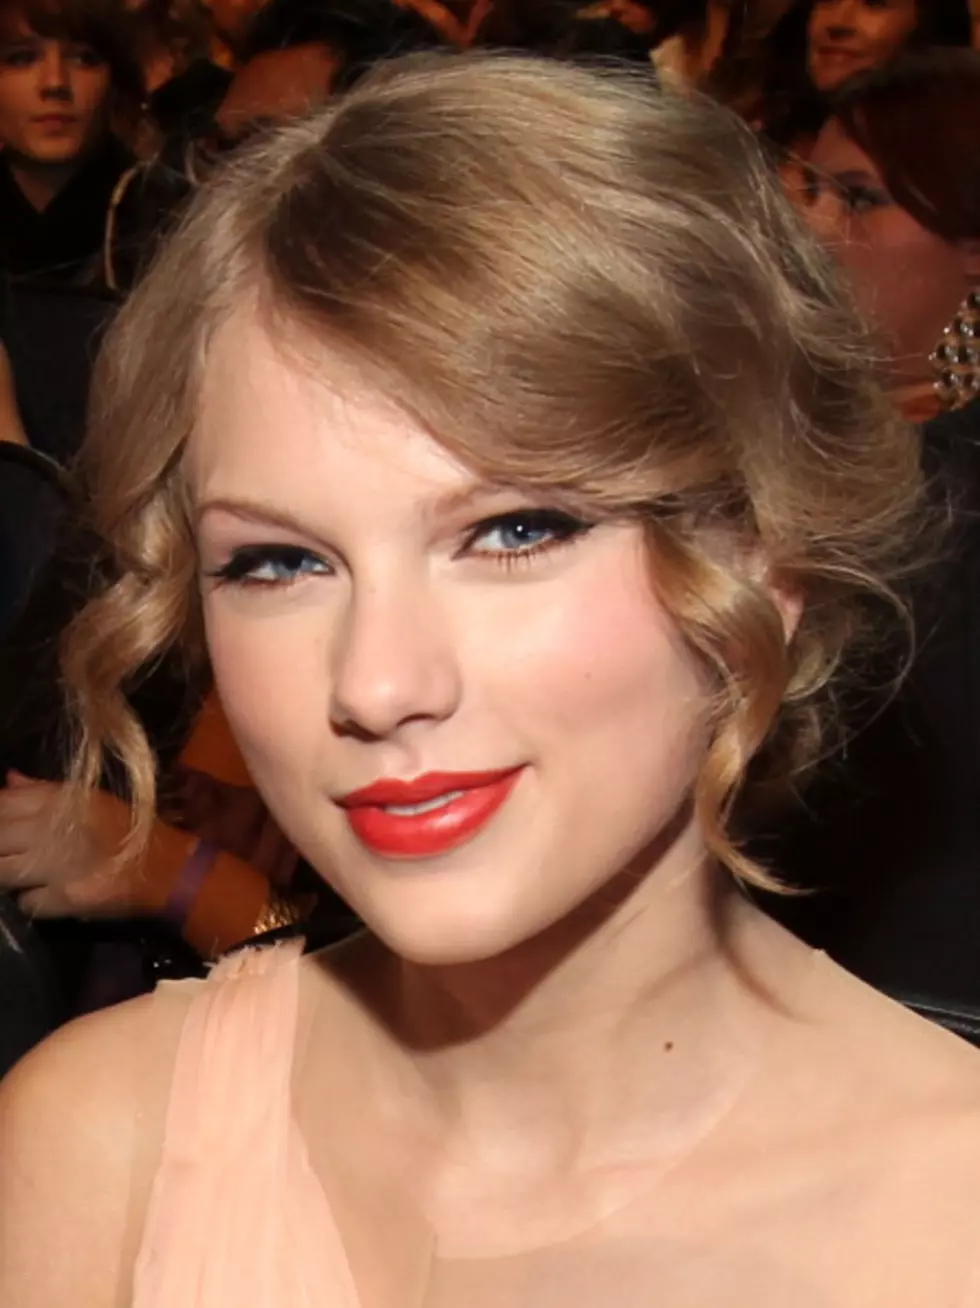 Taylor Swift Perfume, Greeting Cards, Motor Oil? [VIDEOS]